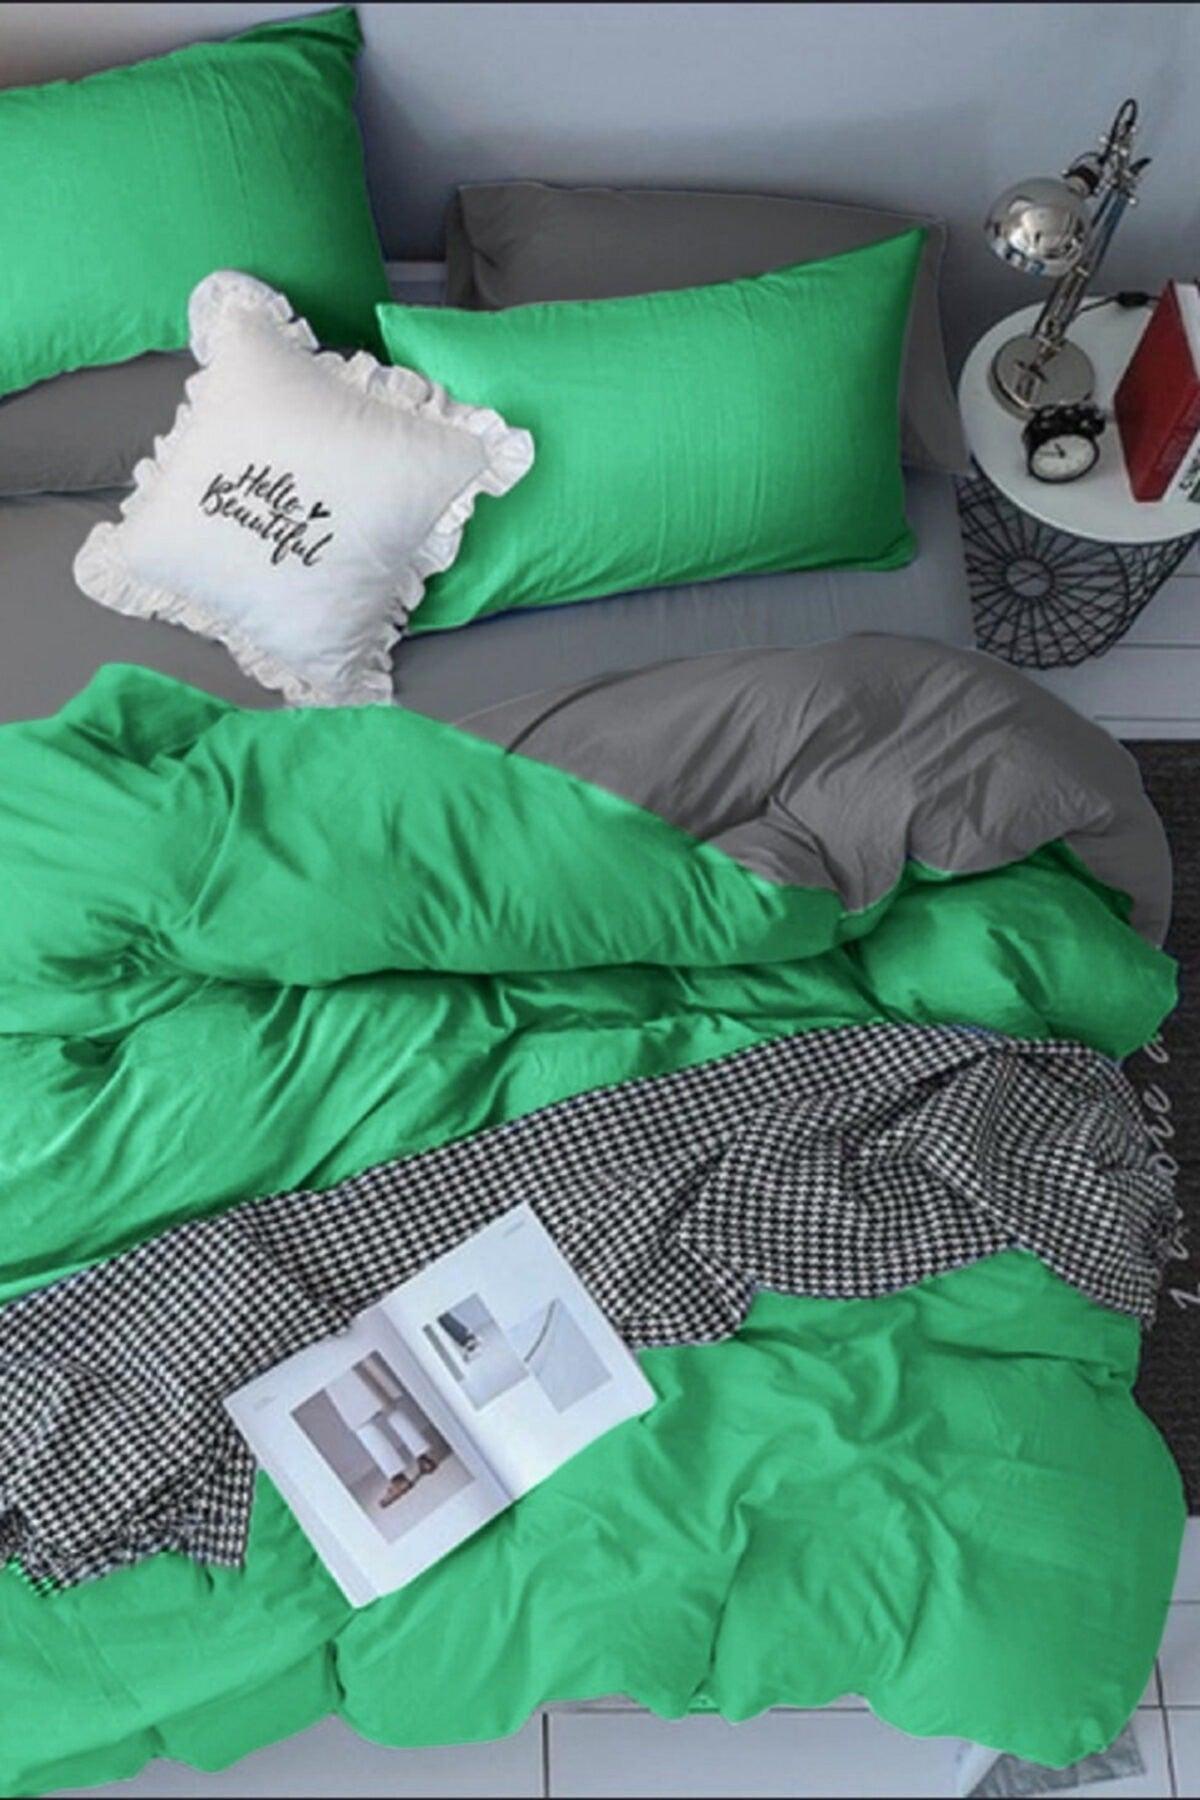 Double Double Sided Duvet Cover Set